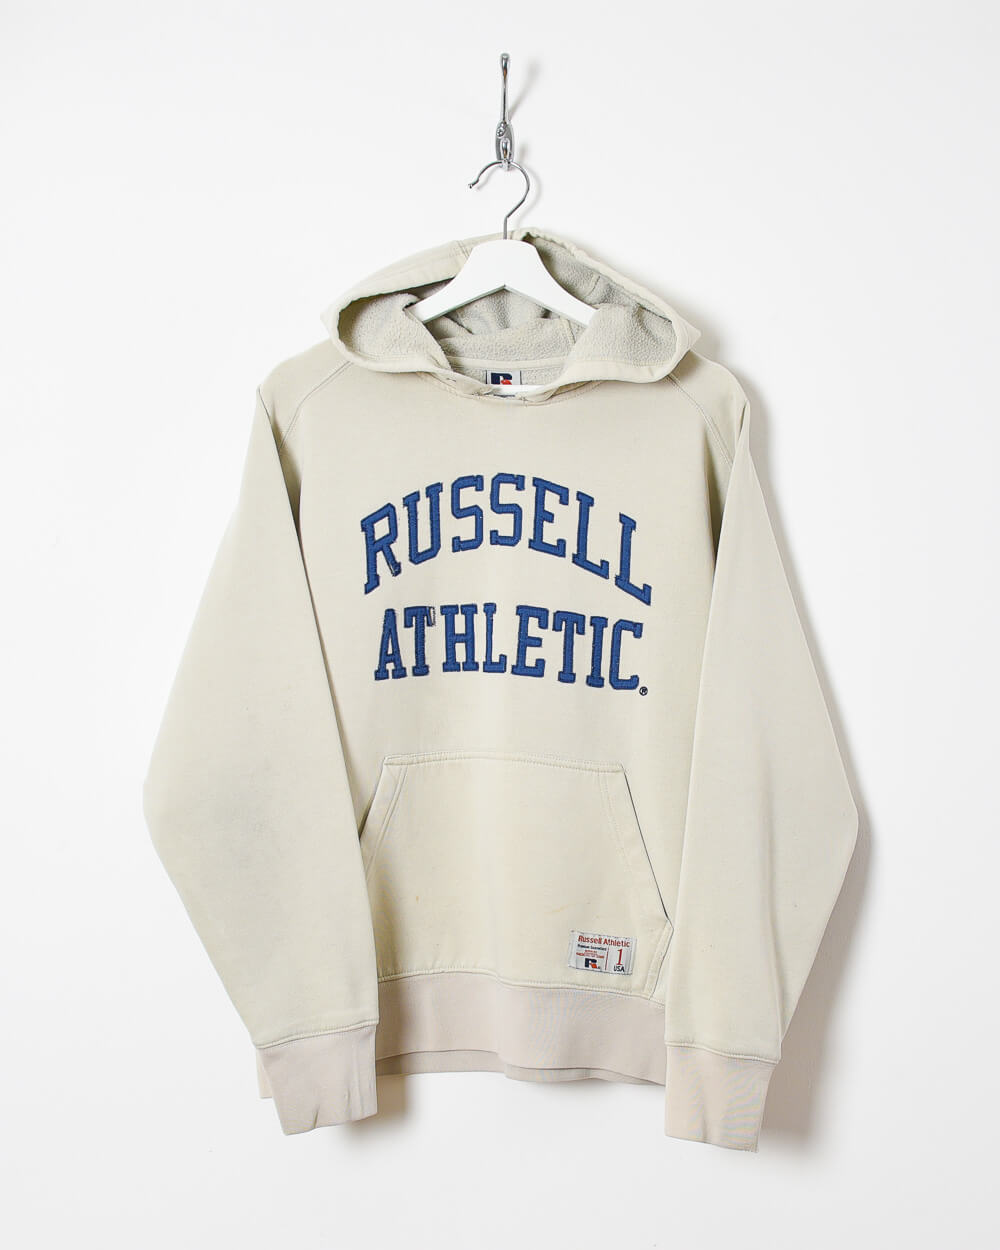 Russell Athletic Hoodie - Medium - Domno Vintage 90s, 80s, 00s Retro and Vintage Clothing 